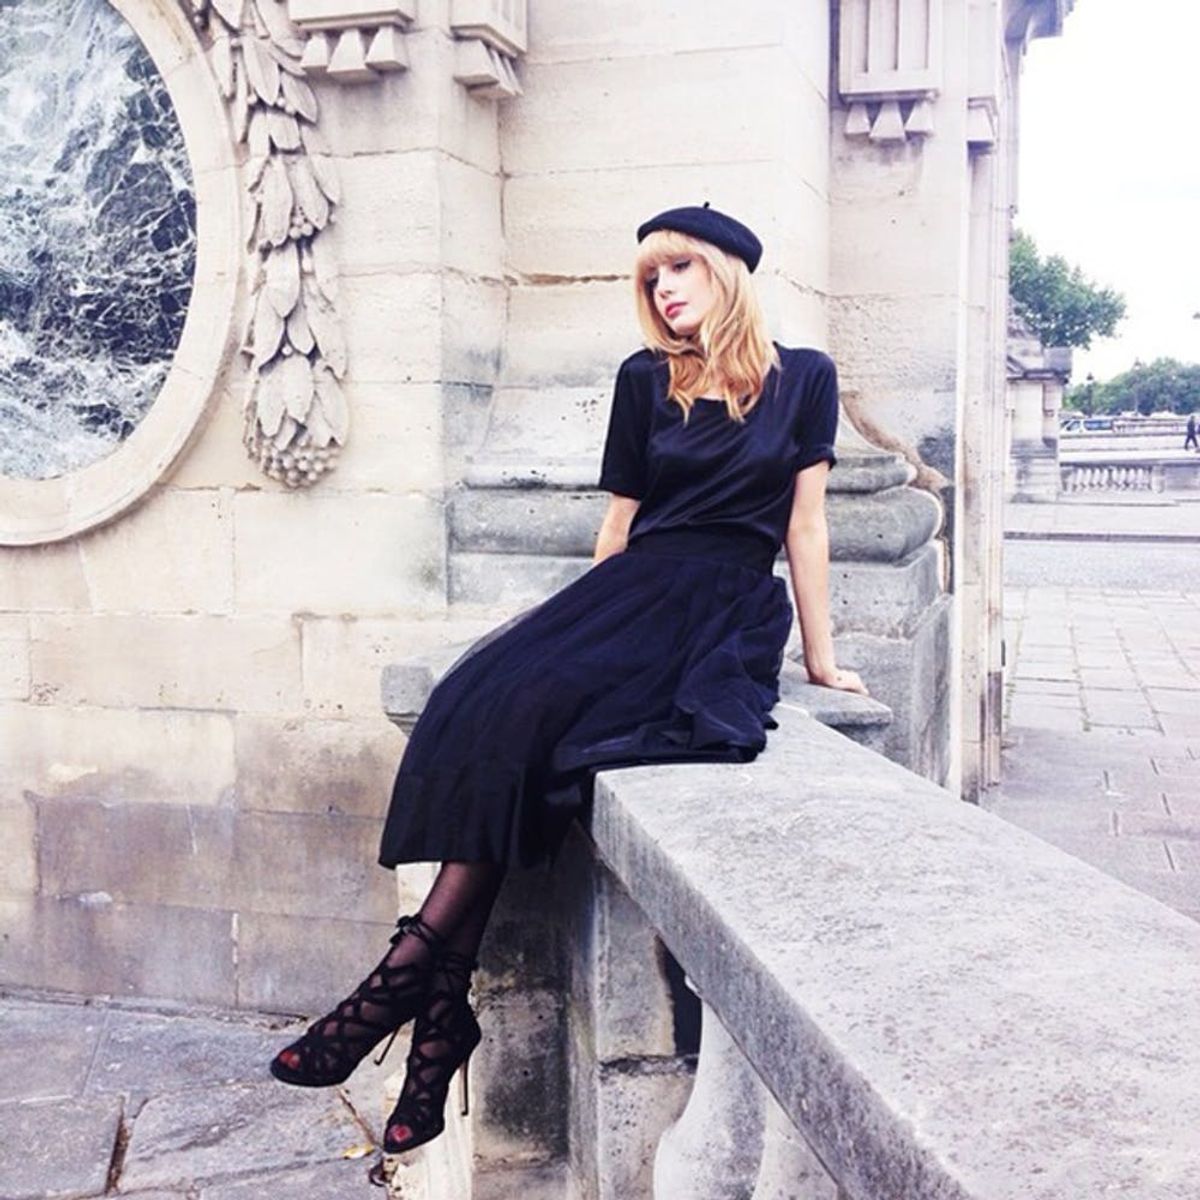 15 French Girl Instagram Accounts You Need to Follow